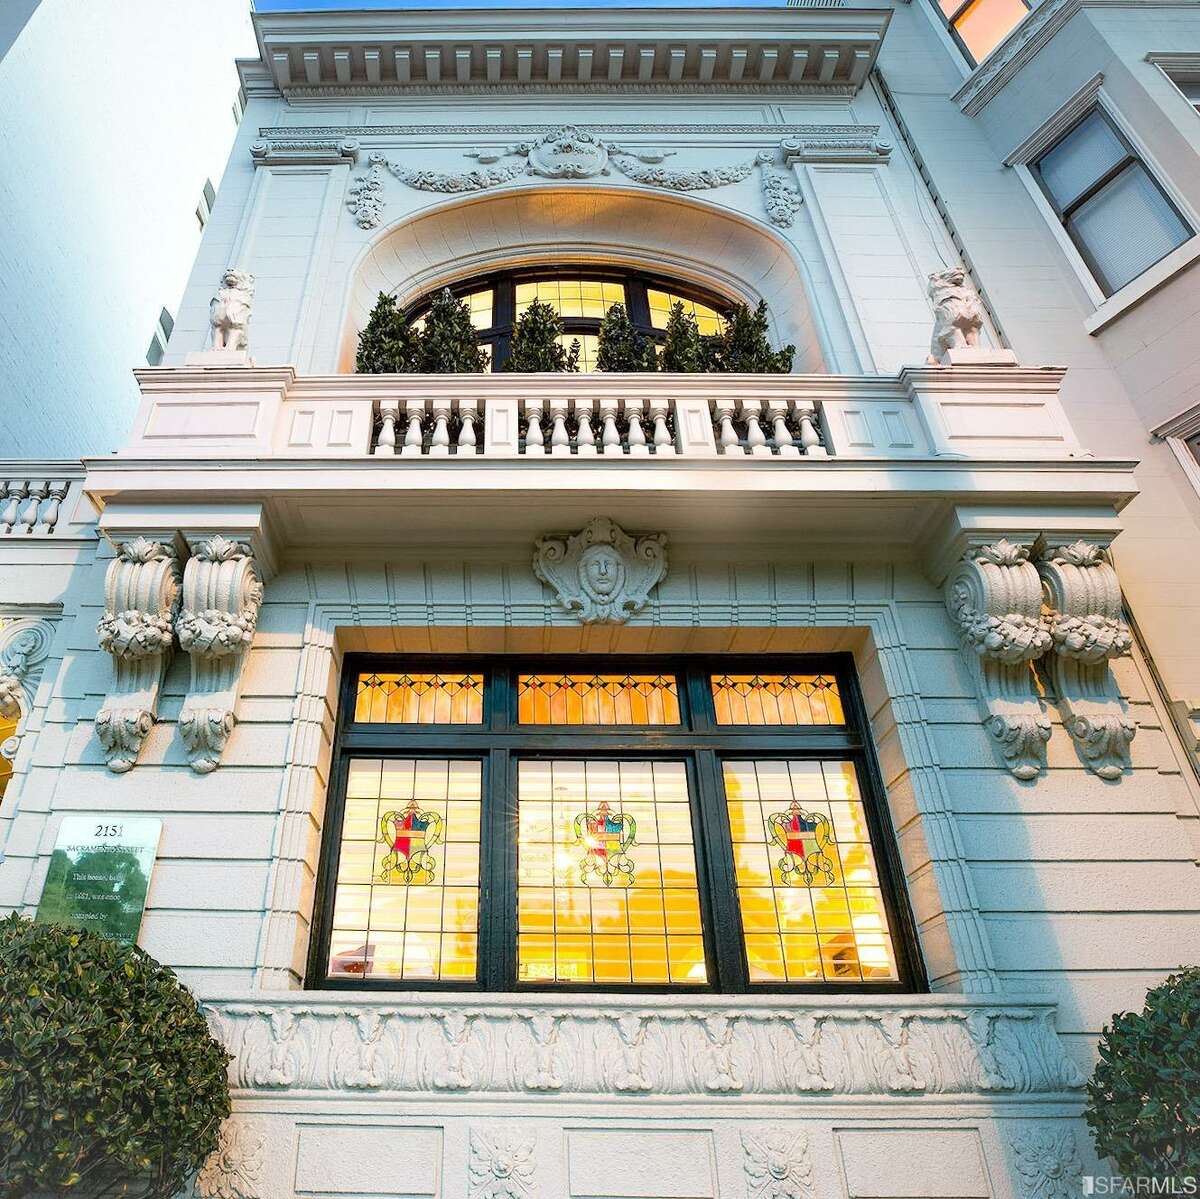 Pacific Heights condo is an ornate Beaux Arts gem